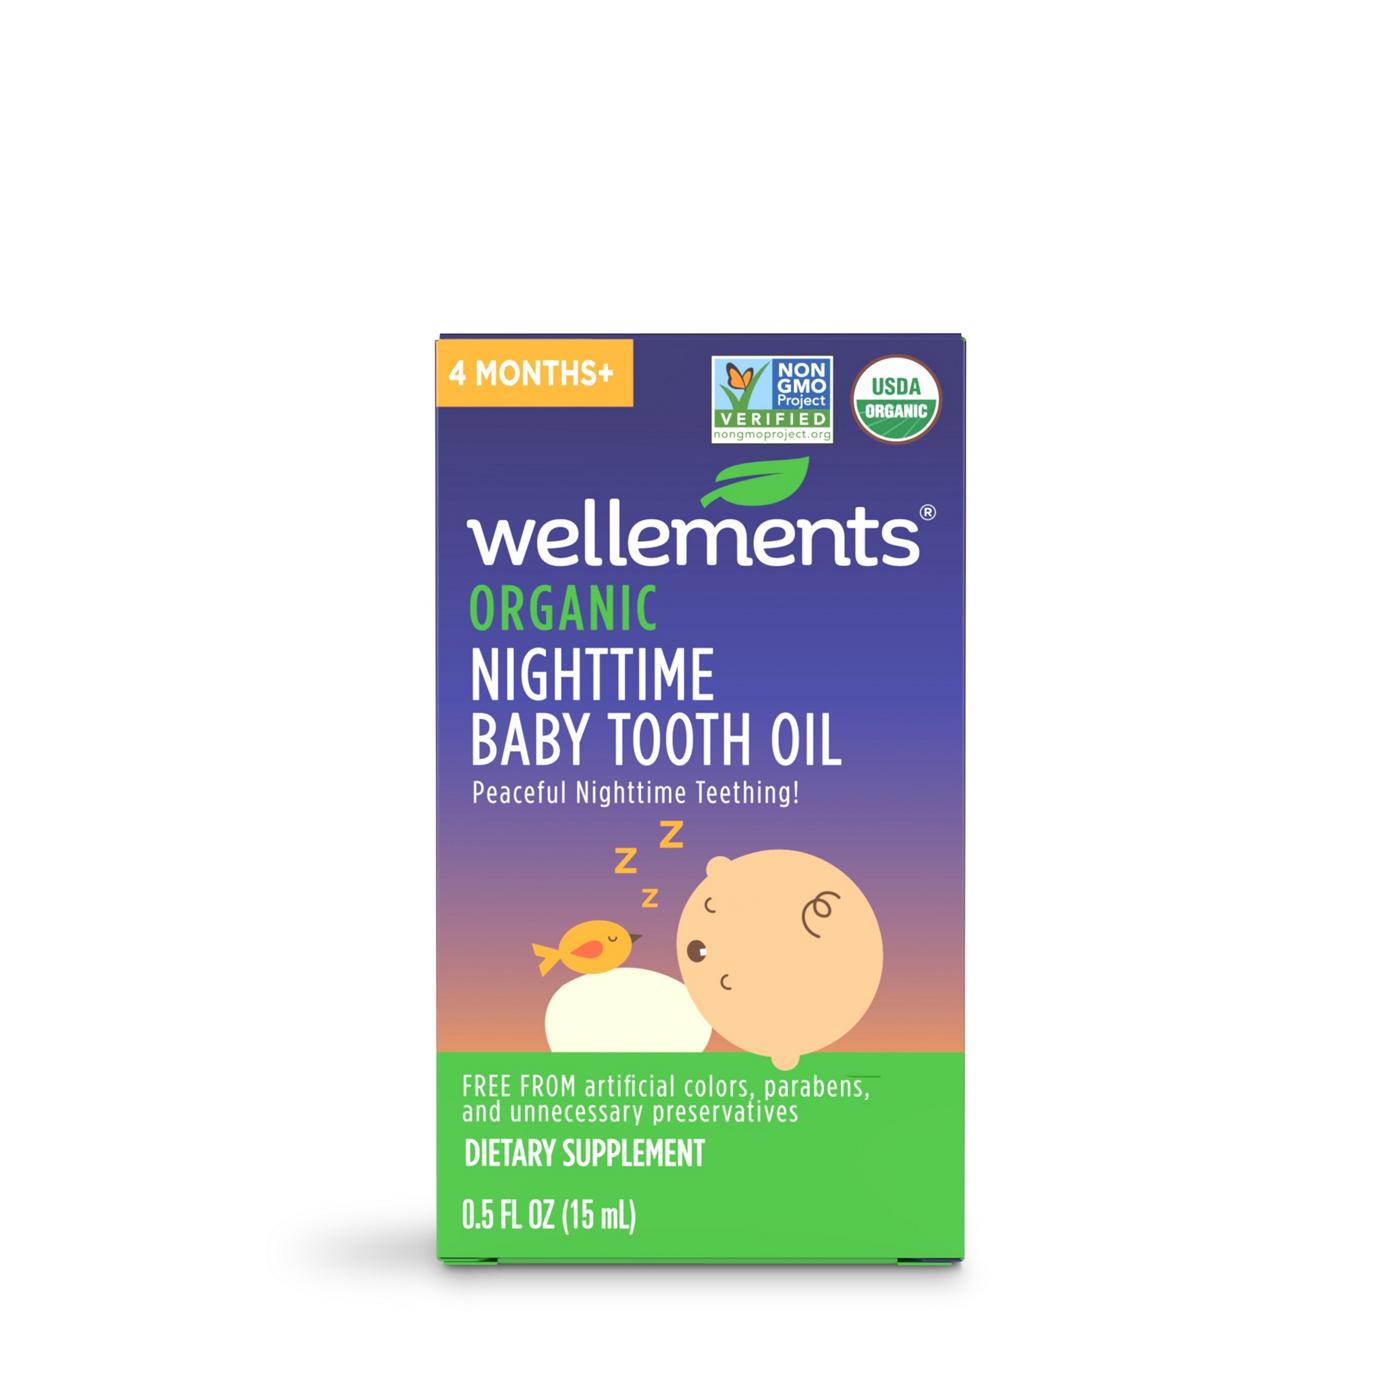 Wellements Organic Nighttime Baby Tooth Oil; image 2 of 4